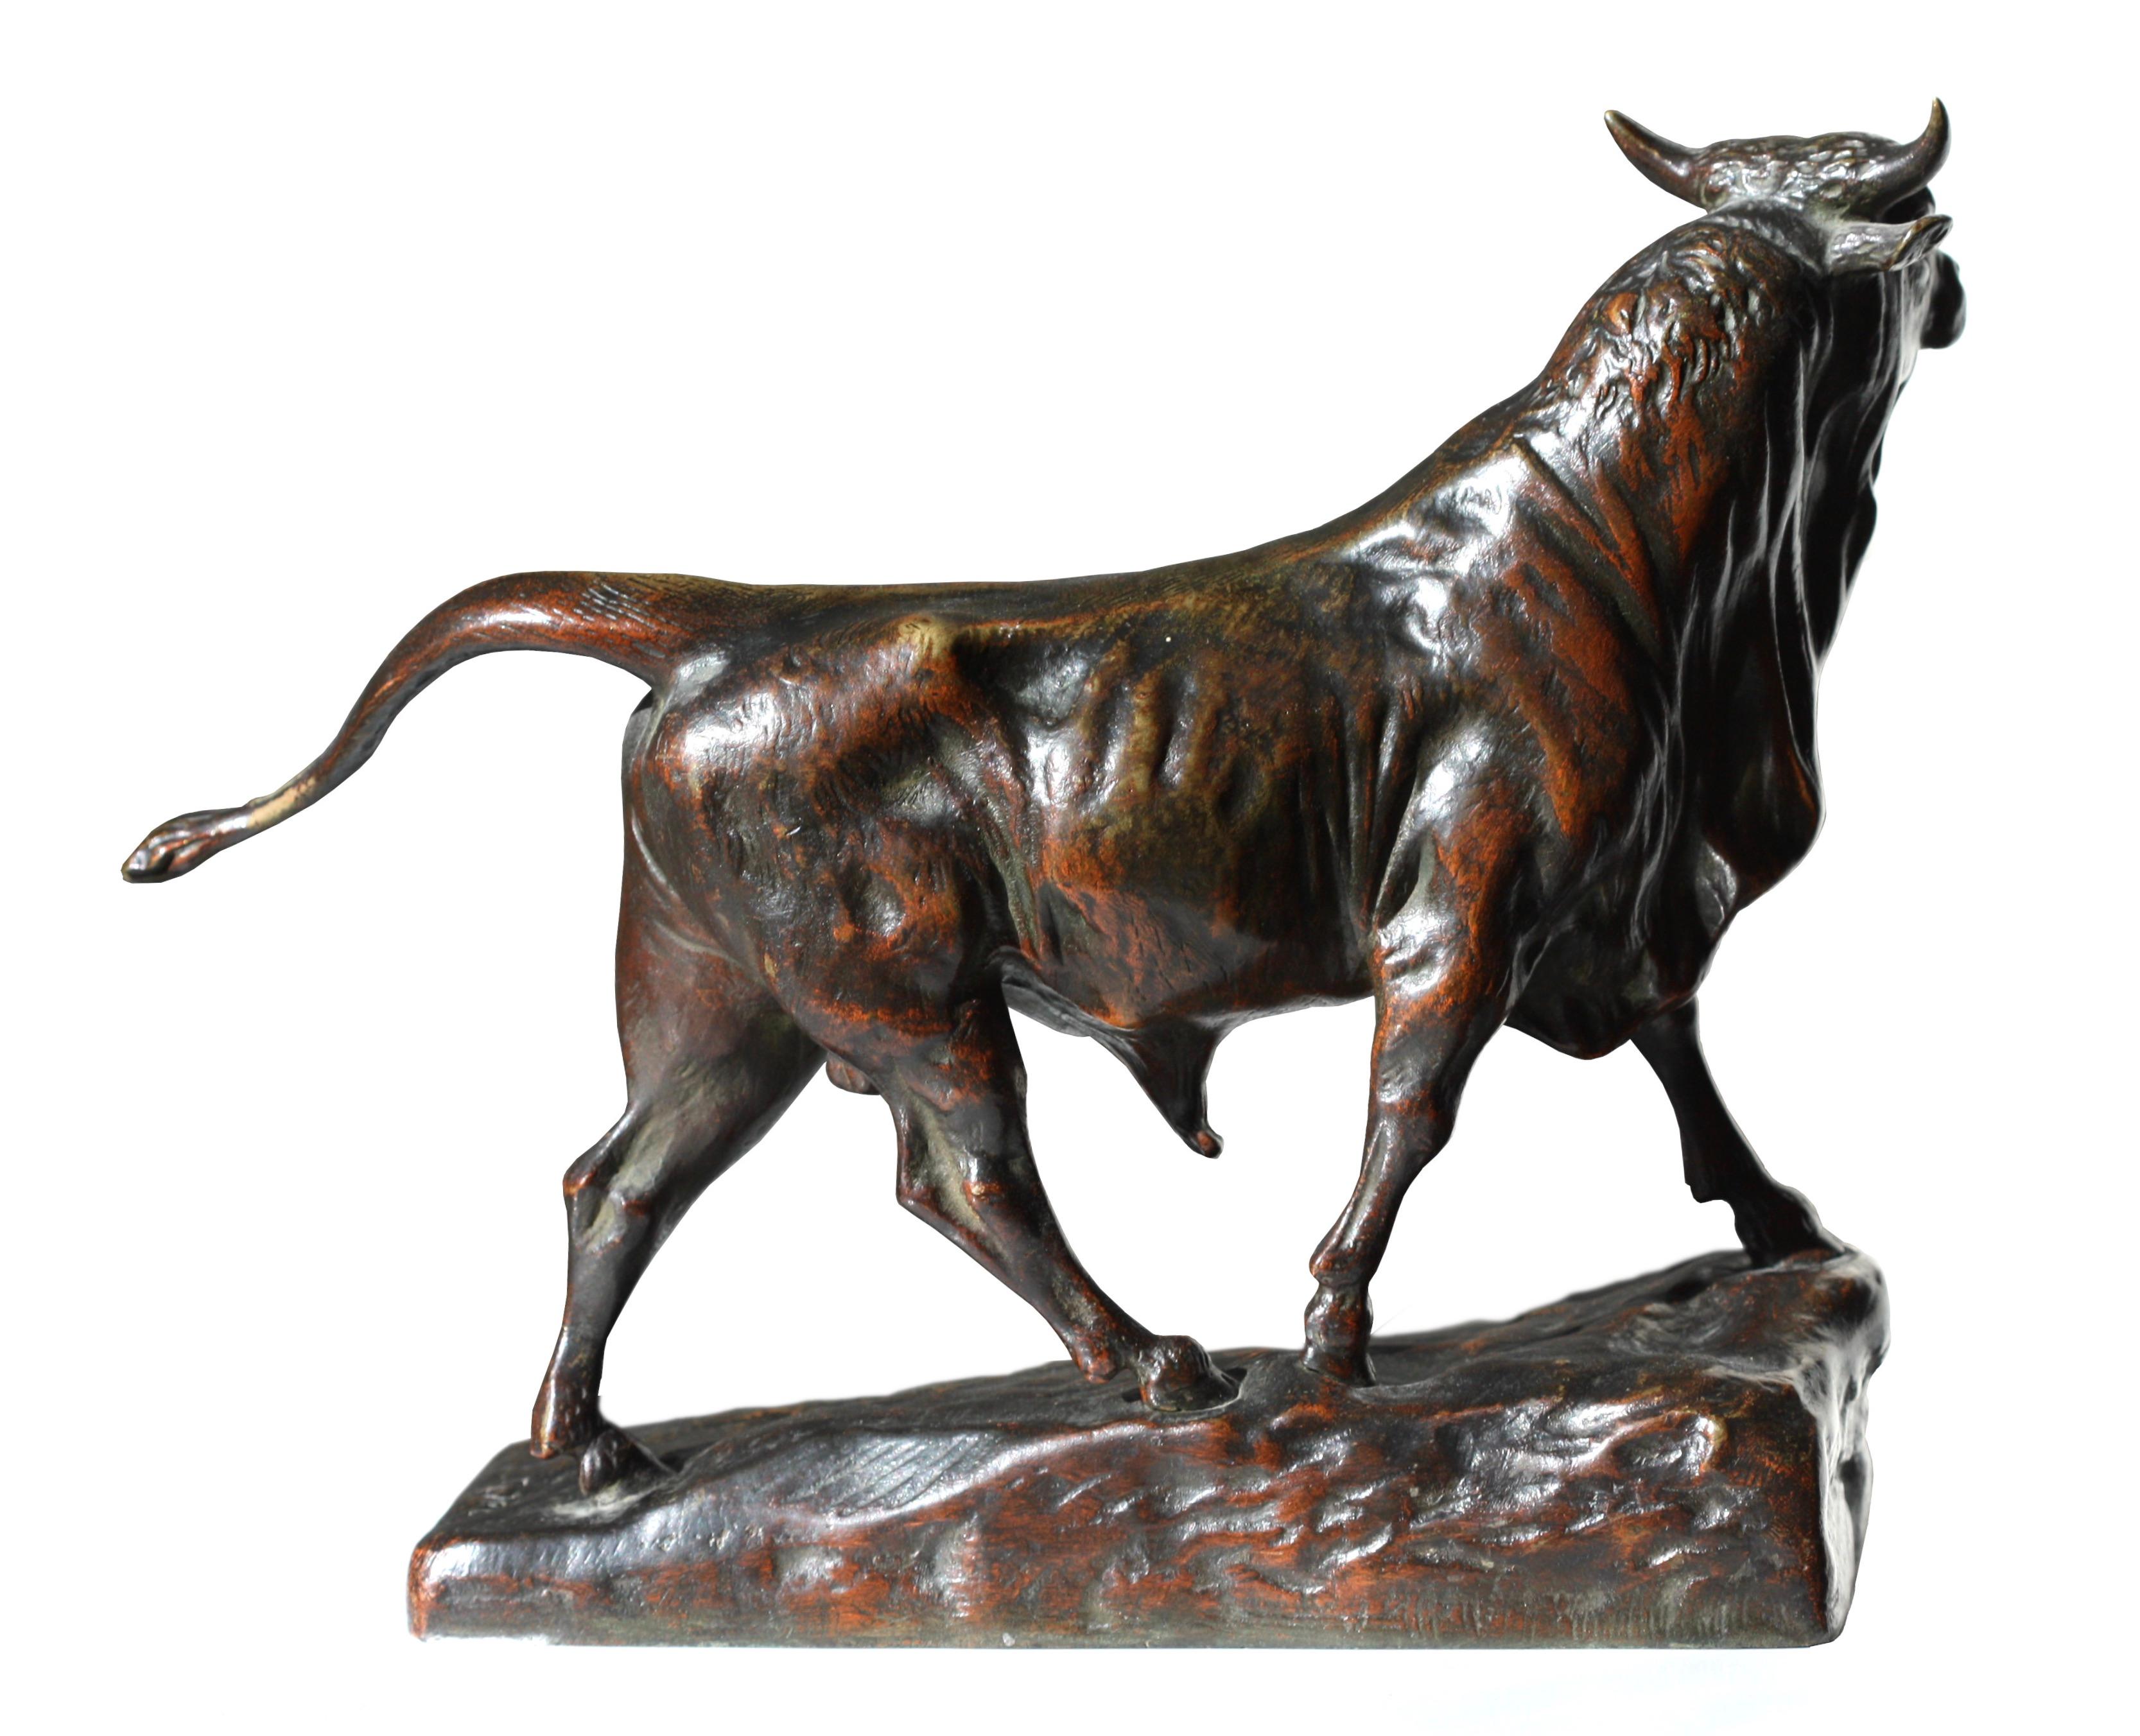 Maurice Favre (1875-1915)
A French bronze bull
The lean body revealing the rib cage, with multiple folds of skin at the neck, chocolate-brown patina.
Measures: Height 8 in. (20.32 cm.), length 8 in. (20.32 cm.), depth 2.5 in. (6.35